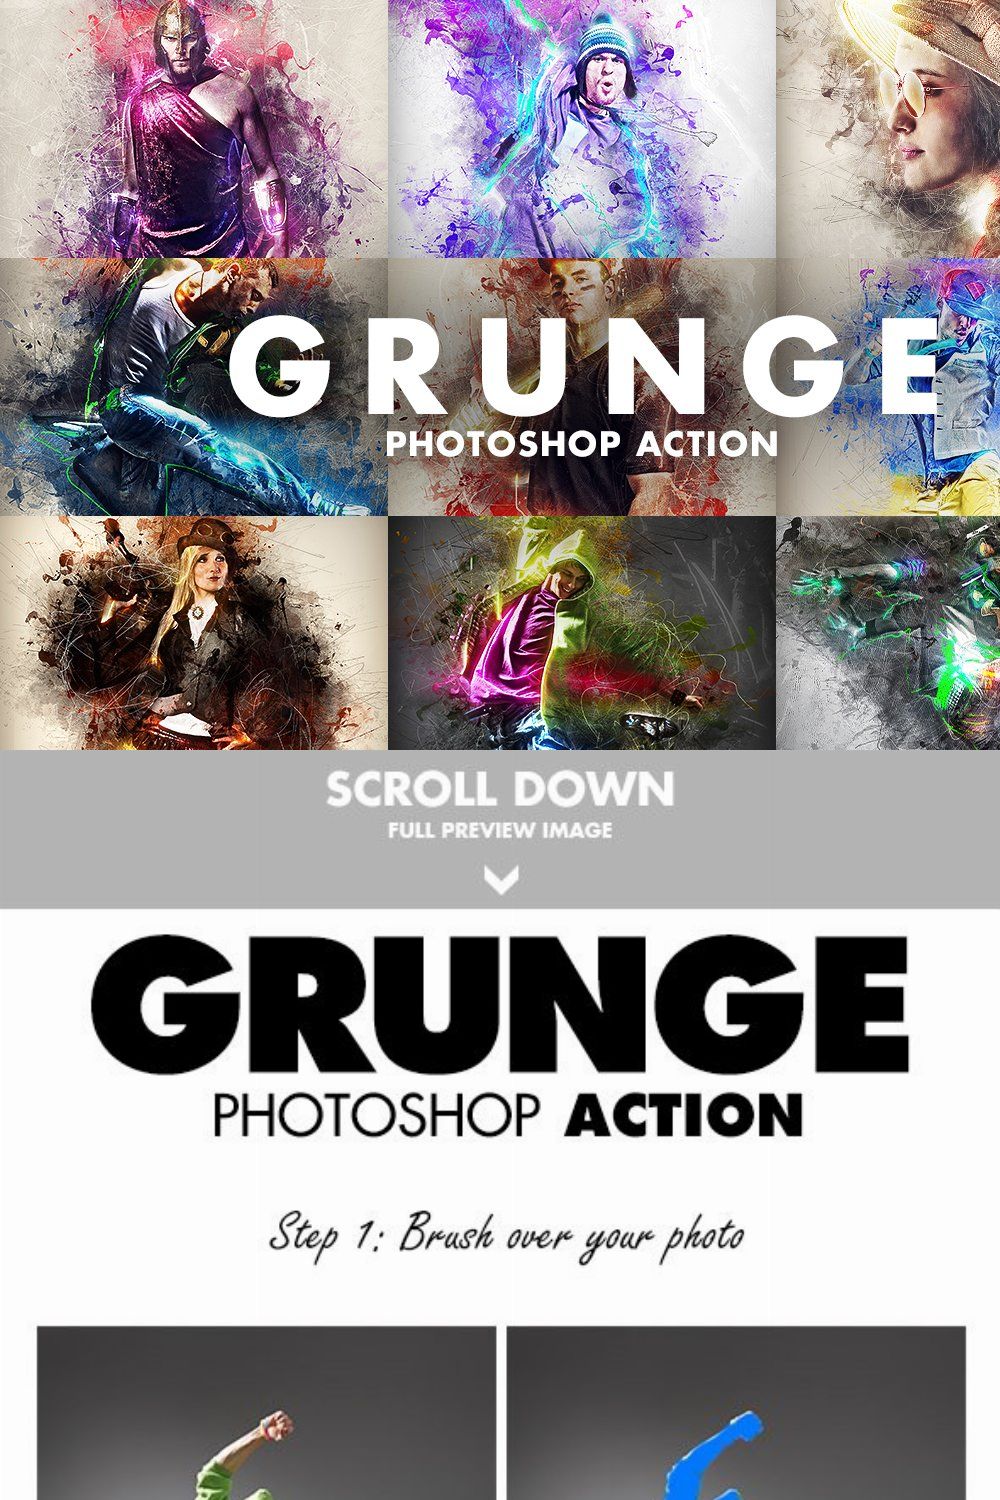 Grunge Photoshop Action pinterest preview image.